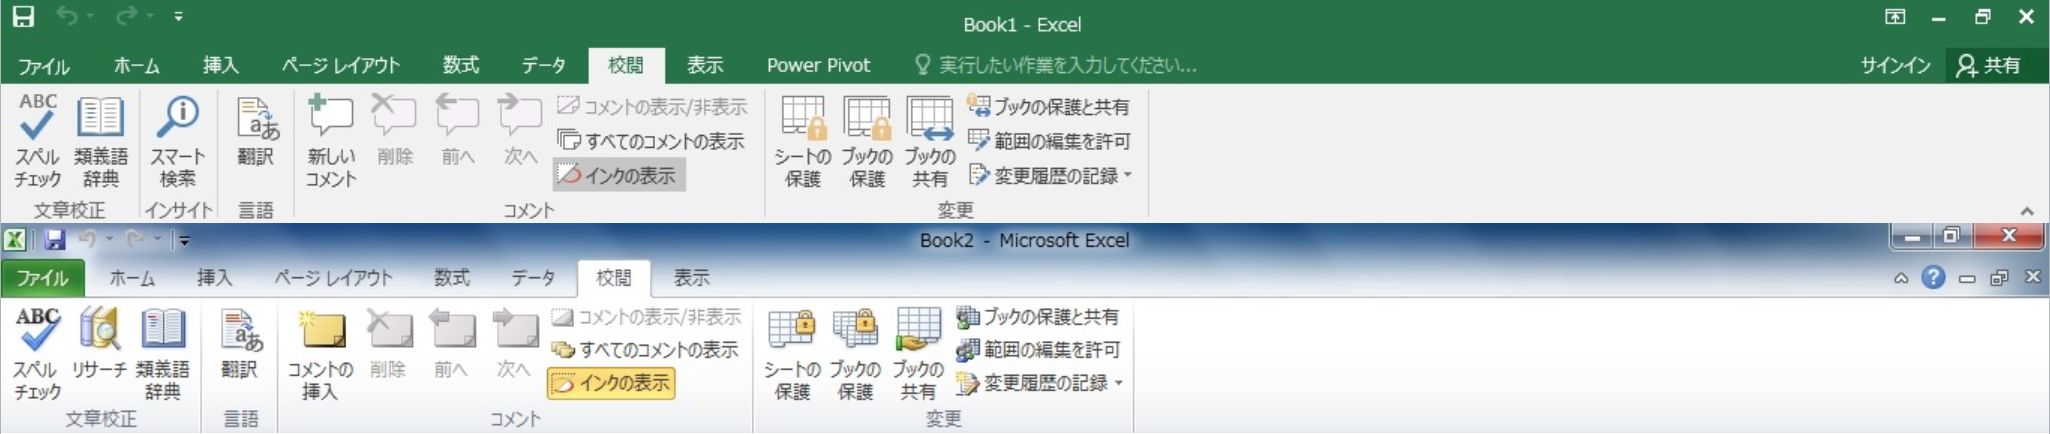 Excel2016とExcel2010の校閲タブ